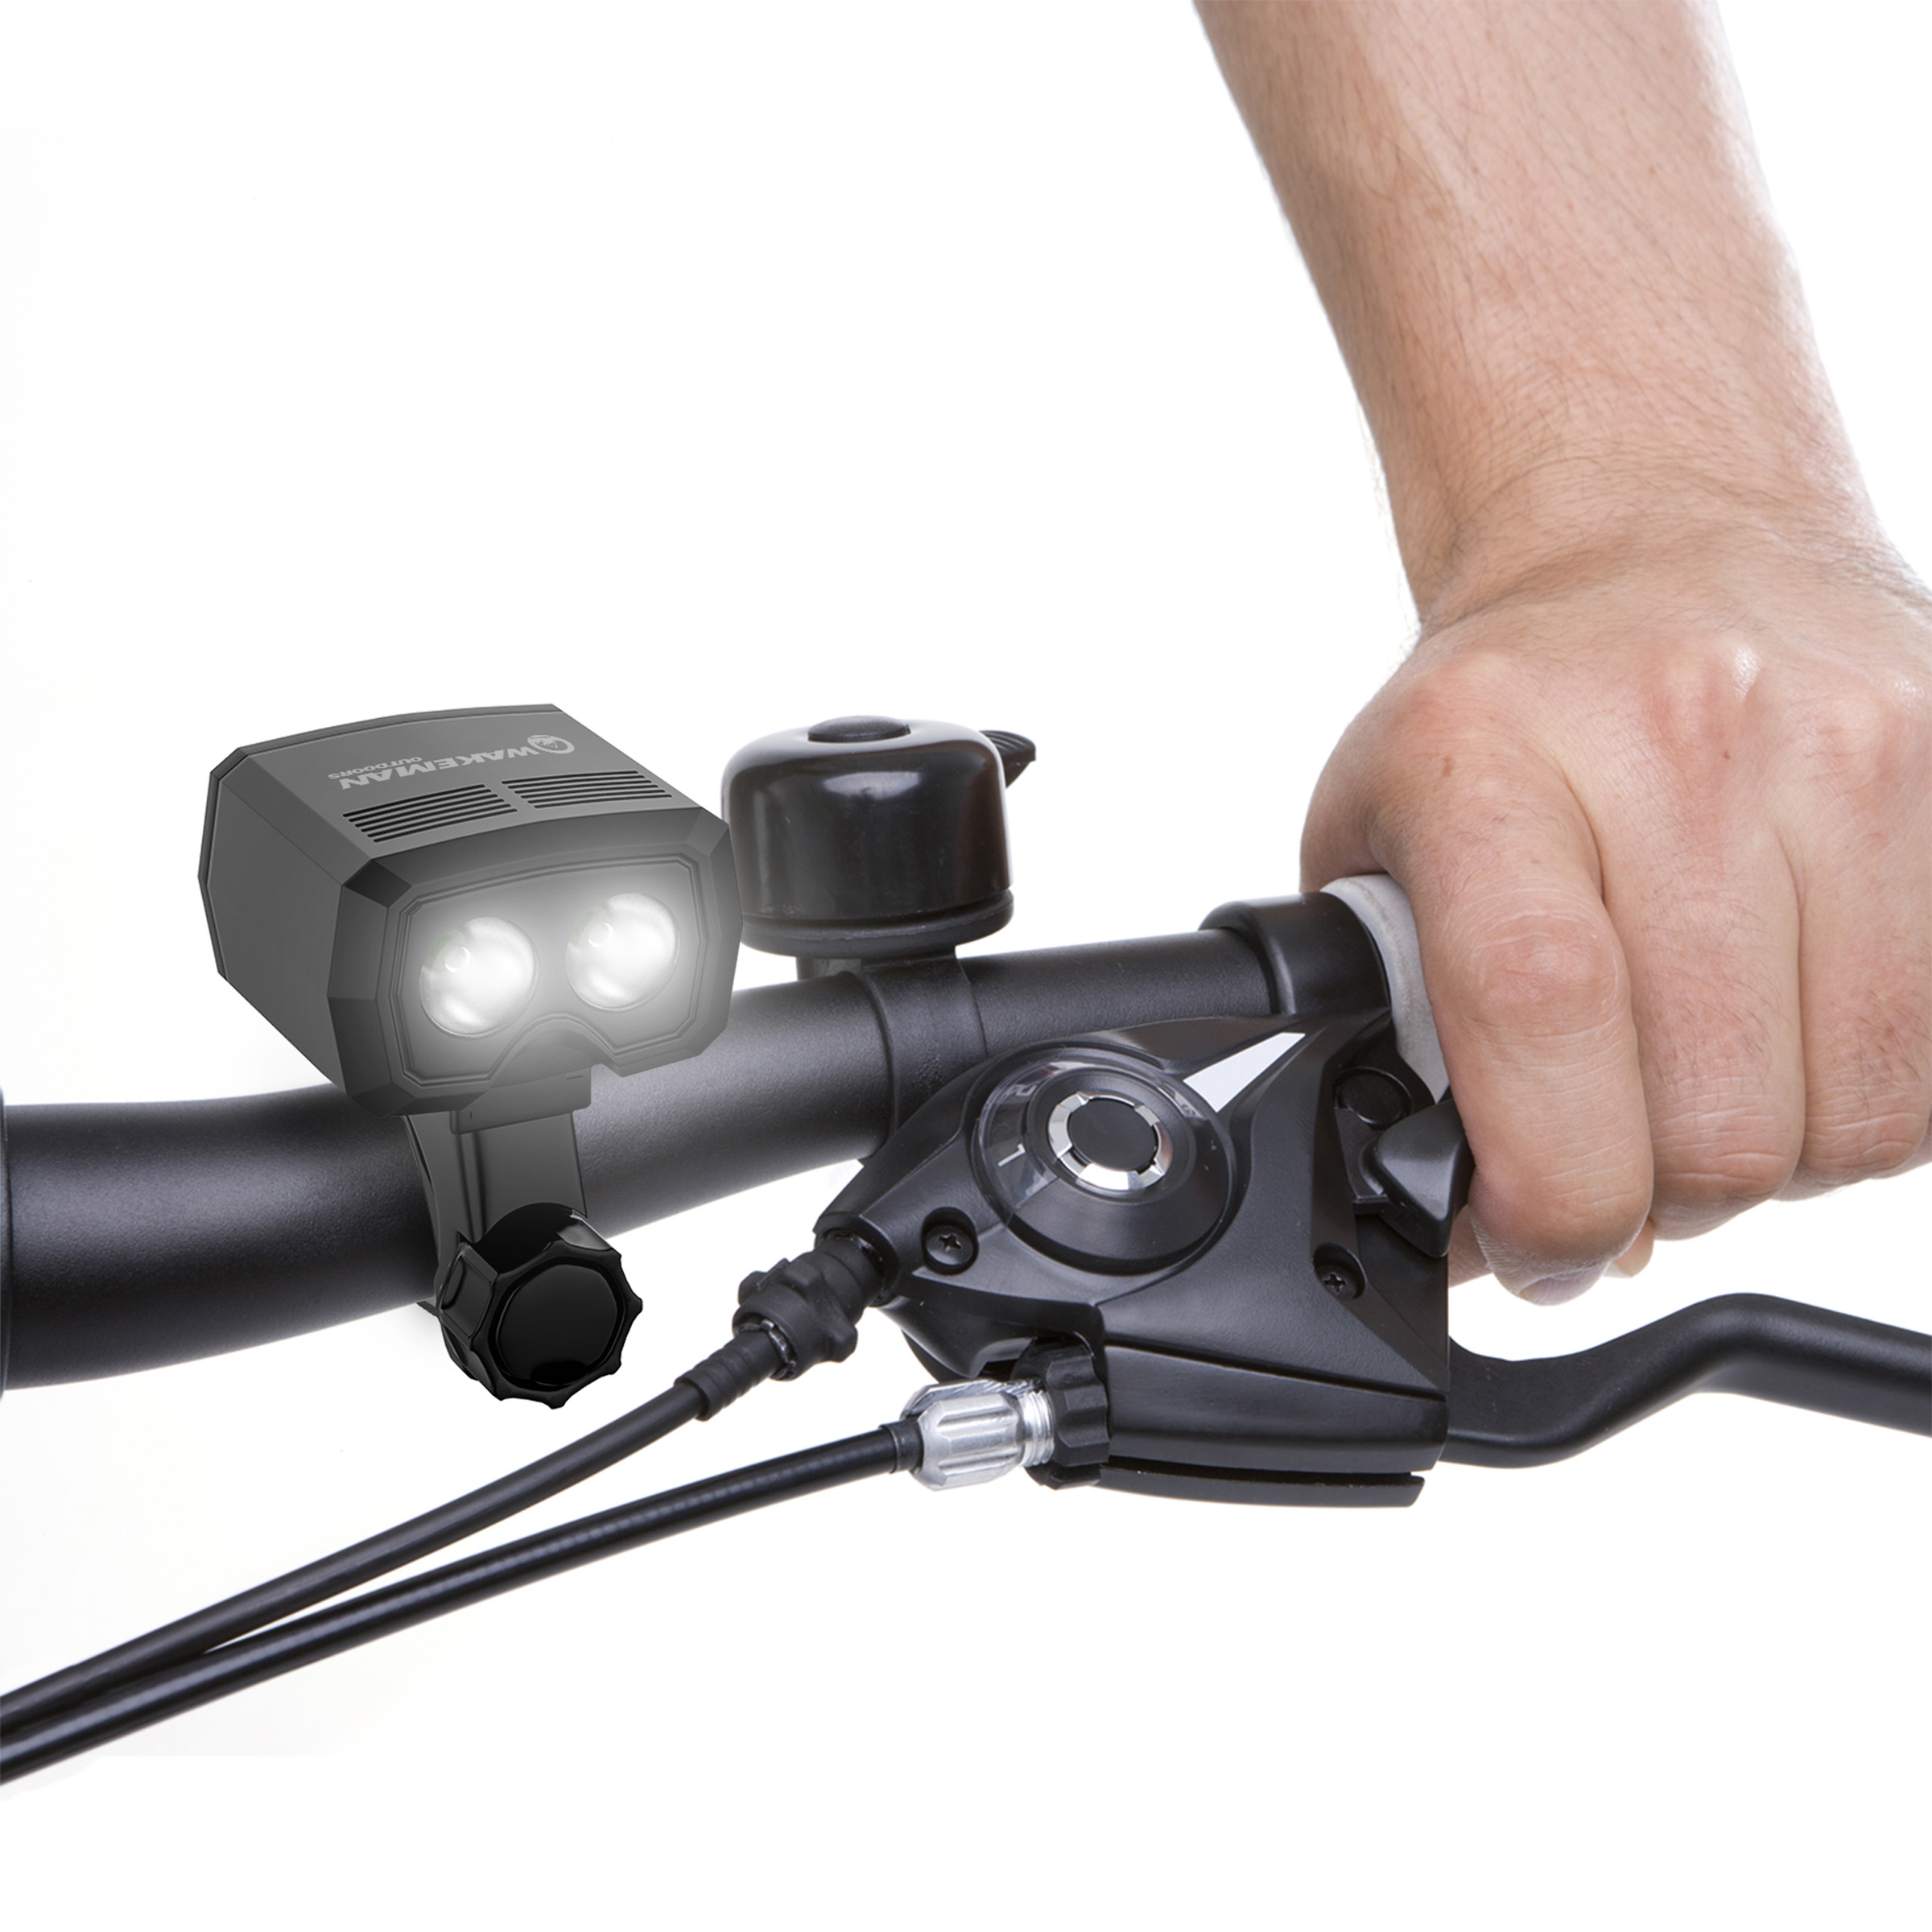 Professional Bright Bike Light Bicycle Rechargeable Headlight Mounting Bracket NO BATTERIES